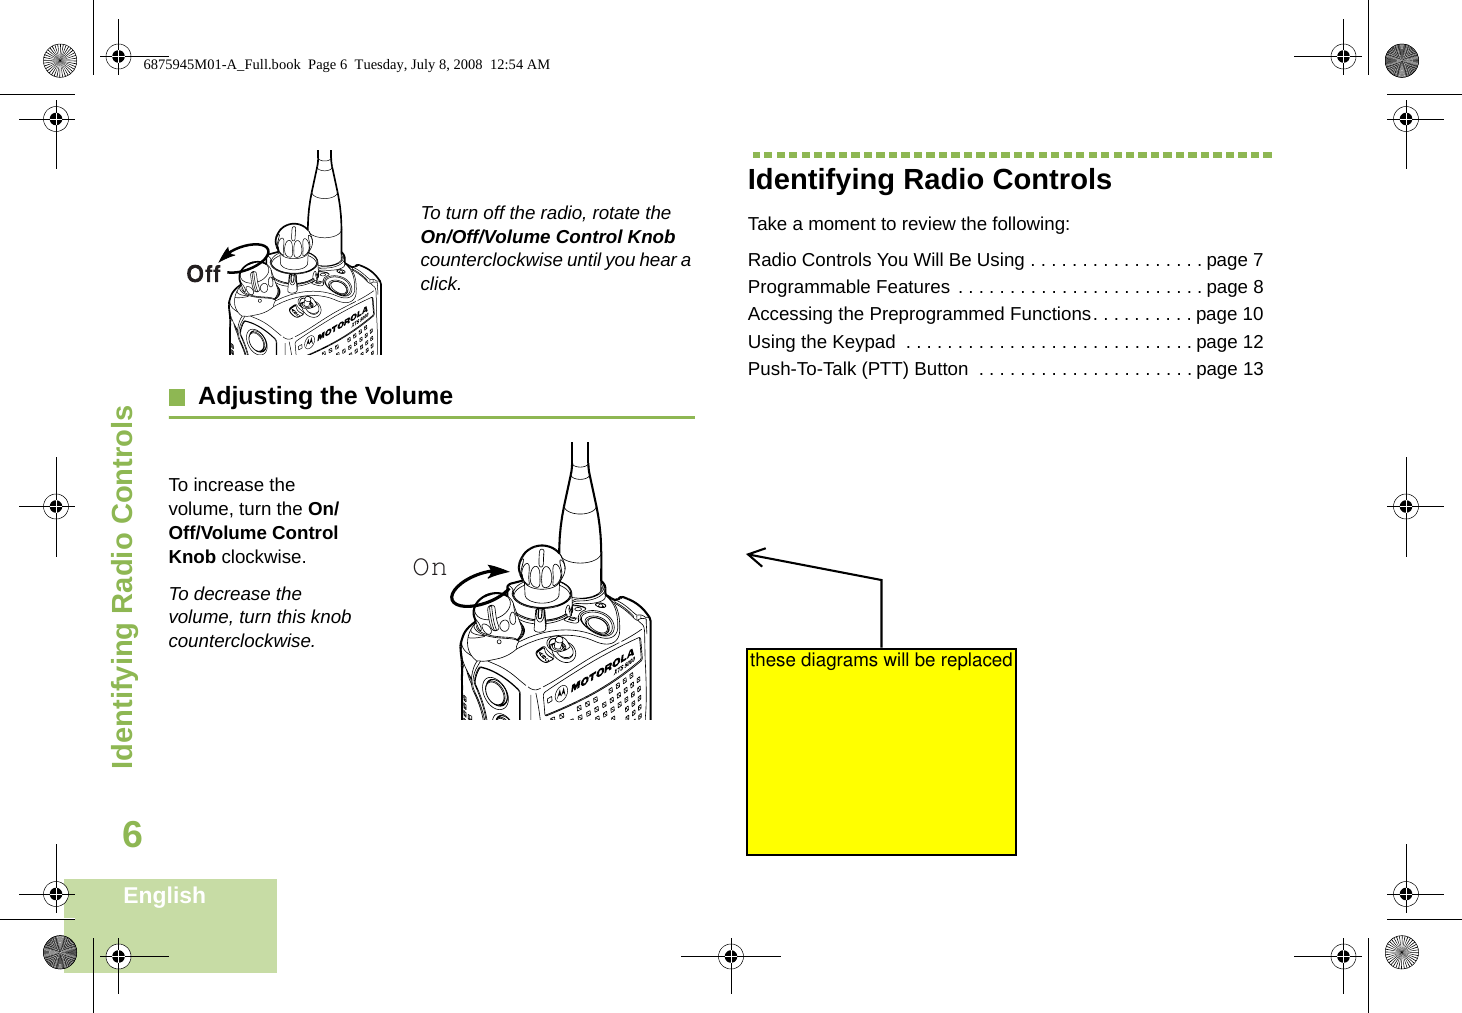 Identifying Radio ControlsEnglish6To turn off the radio, rotate the On/Off/Volume Control Knob counterclockwise until you hear a click.Adjusting the VolumeTo increase the volume, turn the On/Off/Volume Control Knob clockwise.To decrease the volume, turn this knob counterclockwise.Identifying Radio ControlsTake a moment to review the following:Radio Controls You Will Be Using . . . . . . . . . . . . . . . . . page 7Programmable Features . . . . . . . . . . . . . . . . . . . . . . . . page 8Accessing the Preprogrammed Functions. . . . . . . . . . page 10Using the Keypad  . . . . . . . . . . . . . . . . . . . . . . . . . . . . page 12Push-To-Talk (PTT) Button  . . . . . . . . . . . . . . . . . . . . . page 13On6875945M01-A_Full.book  Page 6  Tuesday, July 8, 2008  12:54 AMthese diagrams will be replaced